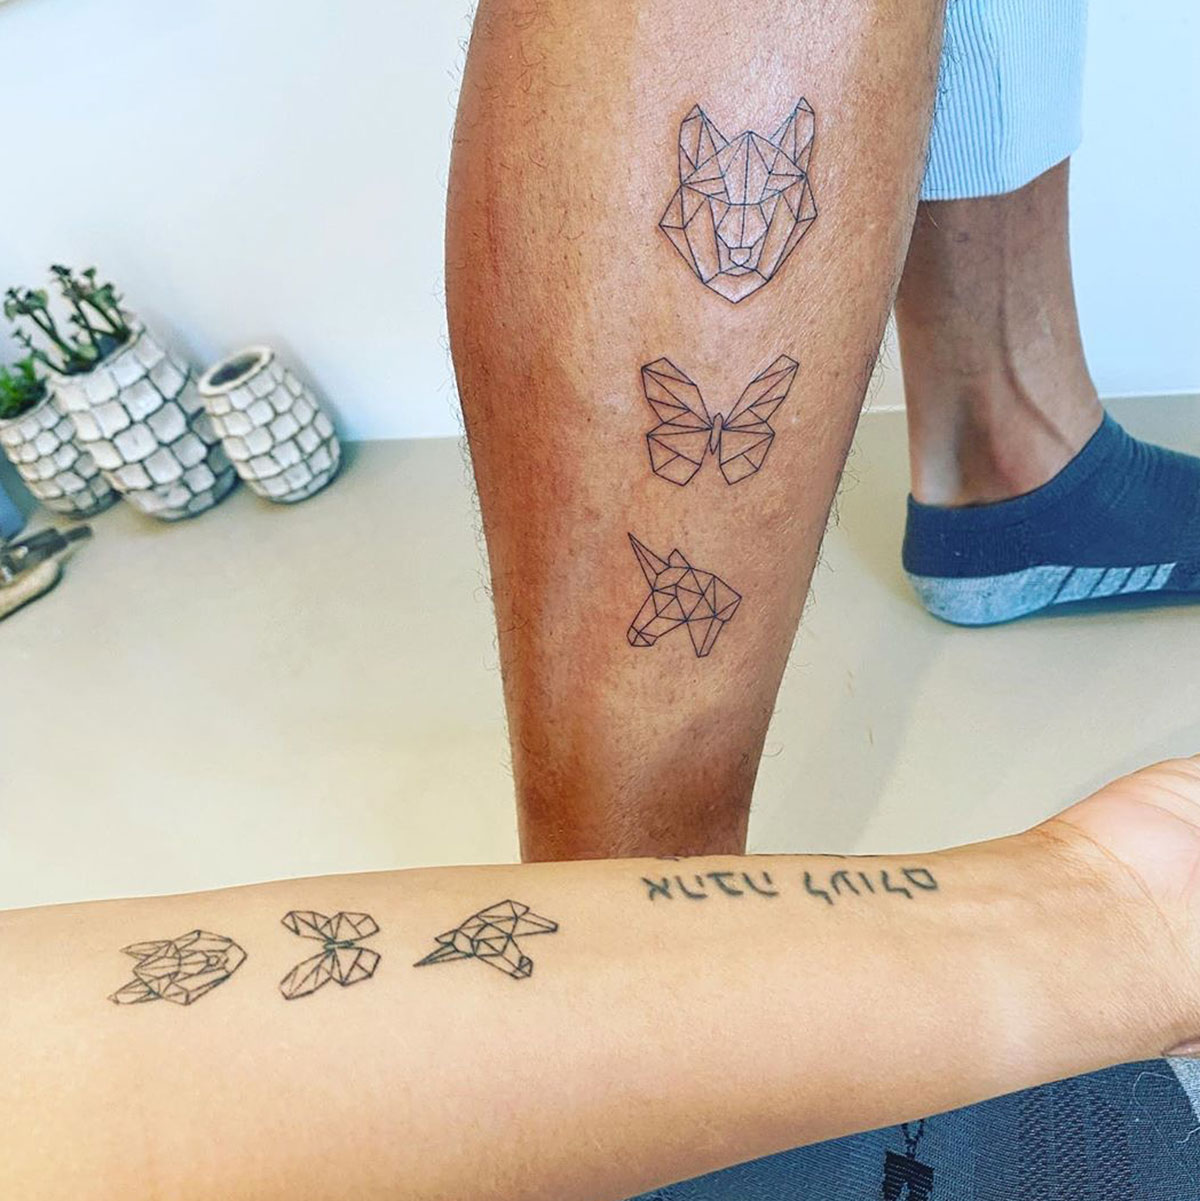 Ayesha and Stephen Curry New Tattoos